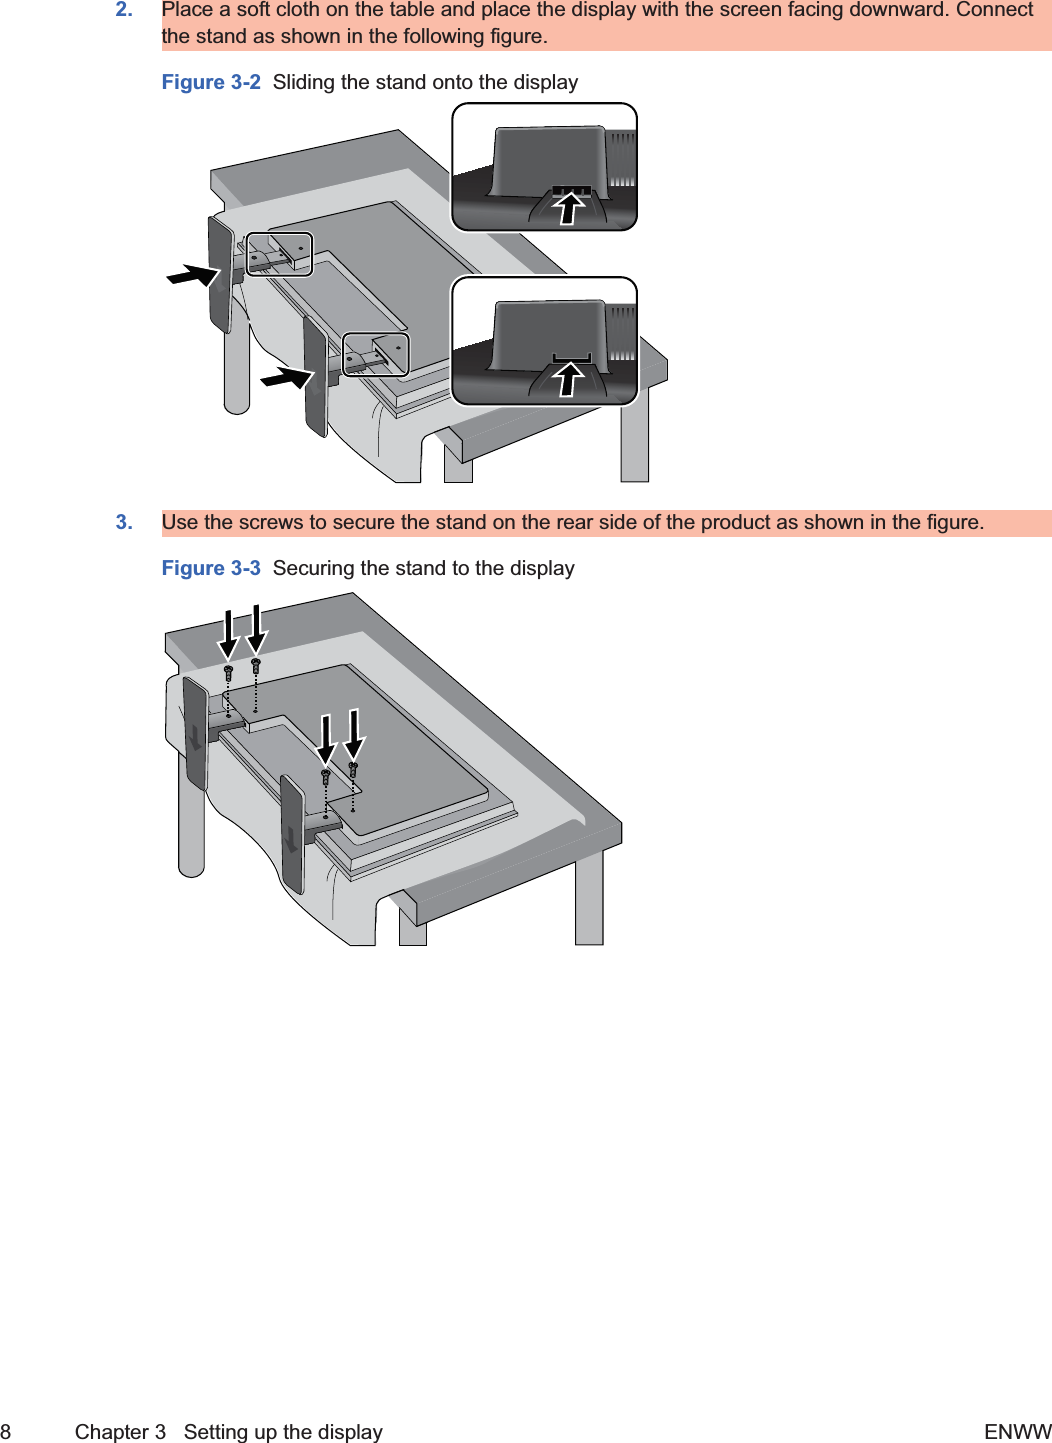 2. Place a soft cloth on the table and place the display with the screen facing downward. Connectthe stand as shown in the following figure.Figure 3-2  Sliding the stand onto the display3. Use the screws to secure the stand on the rear side of the product as shown in the figure.Figure 3-3  Securing the stand to the display8 Chapter 3   Setting up the display ENWW2ndDraft